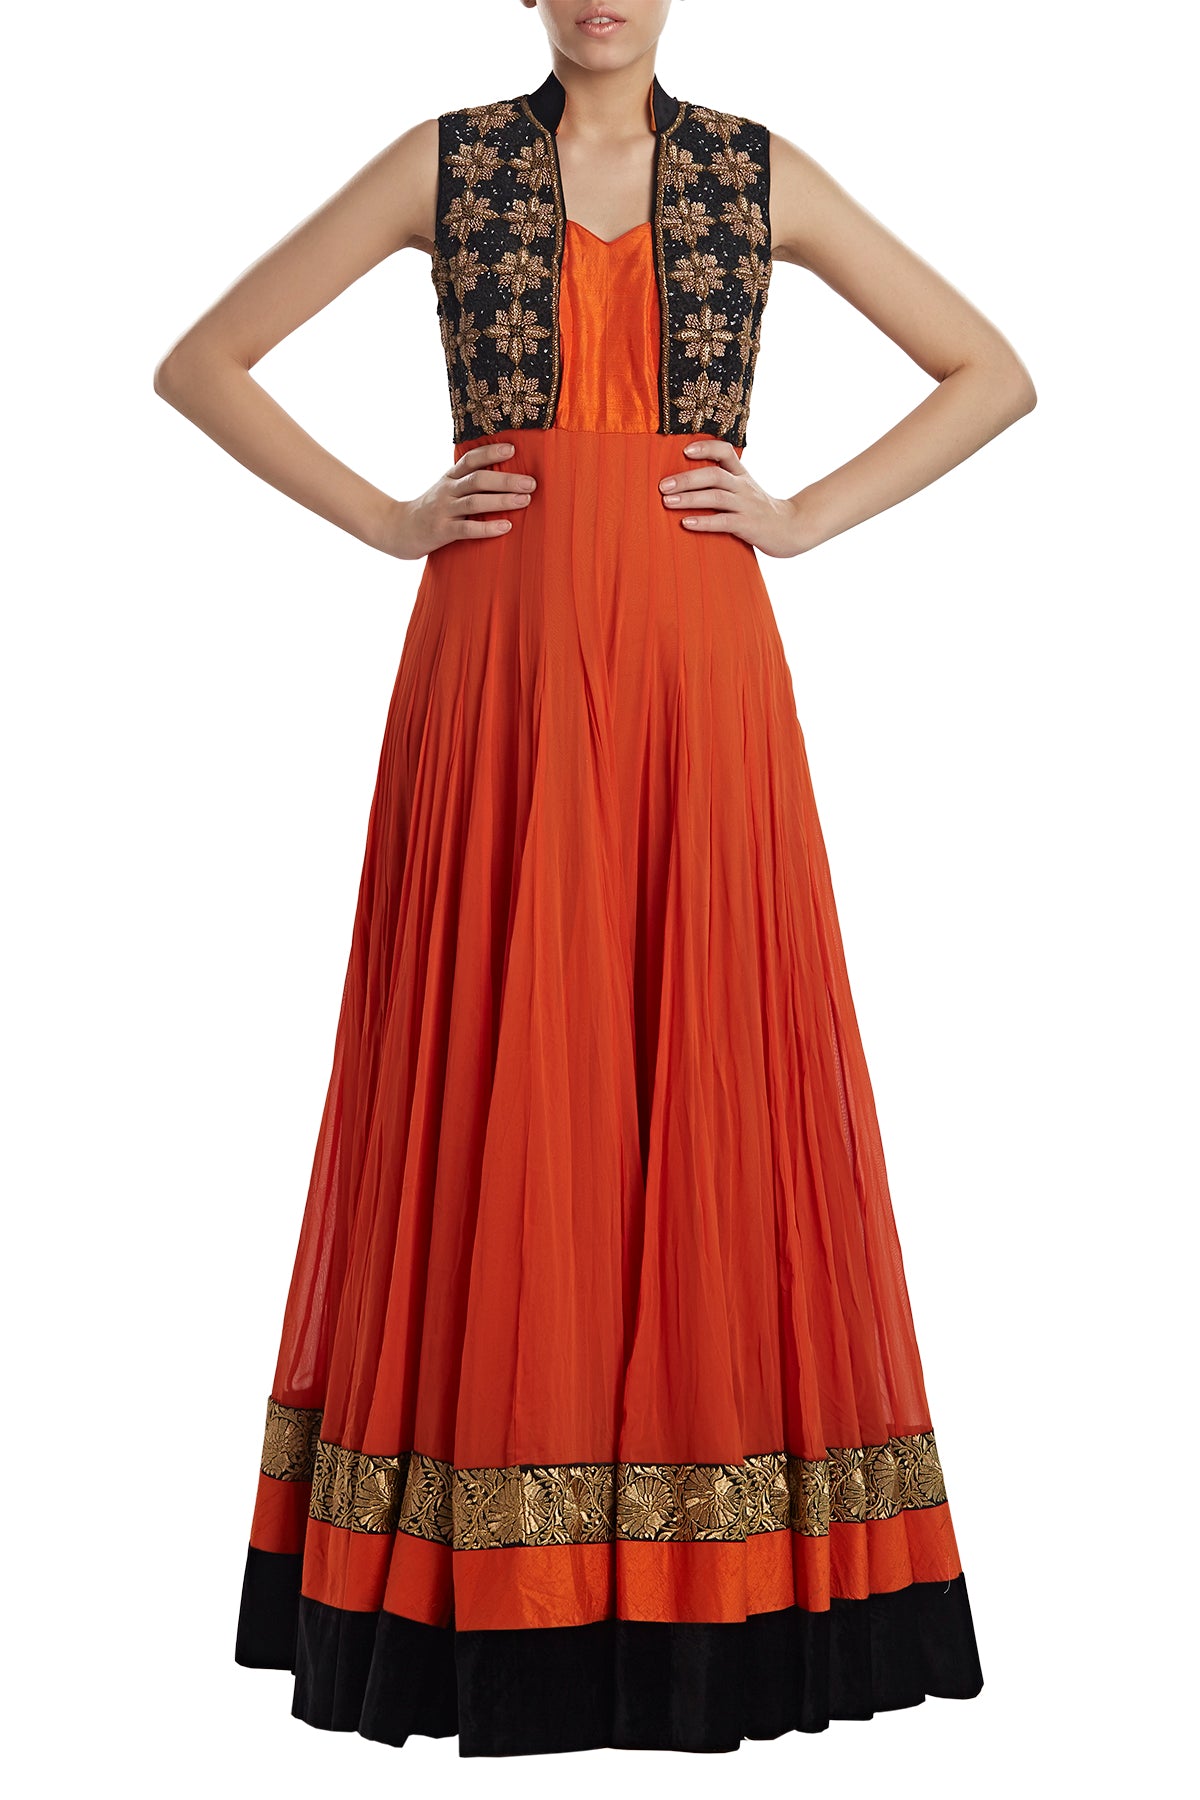 Orange you glad you can get your hands on this one! This georgette anarkali comes in rich black & gold with embroidery and latkans.